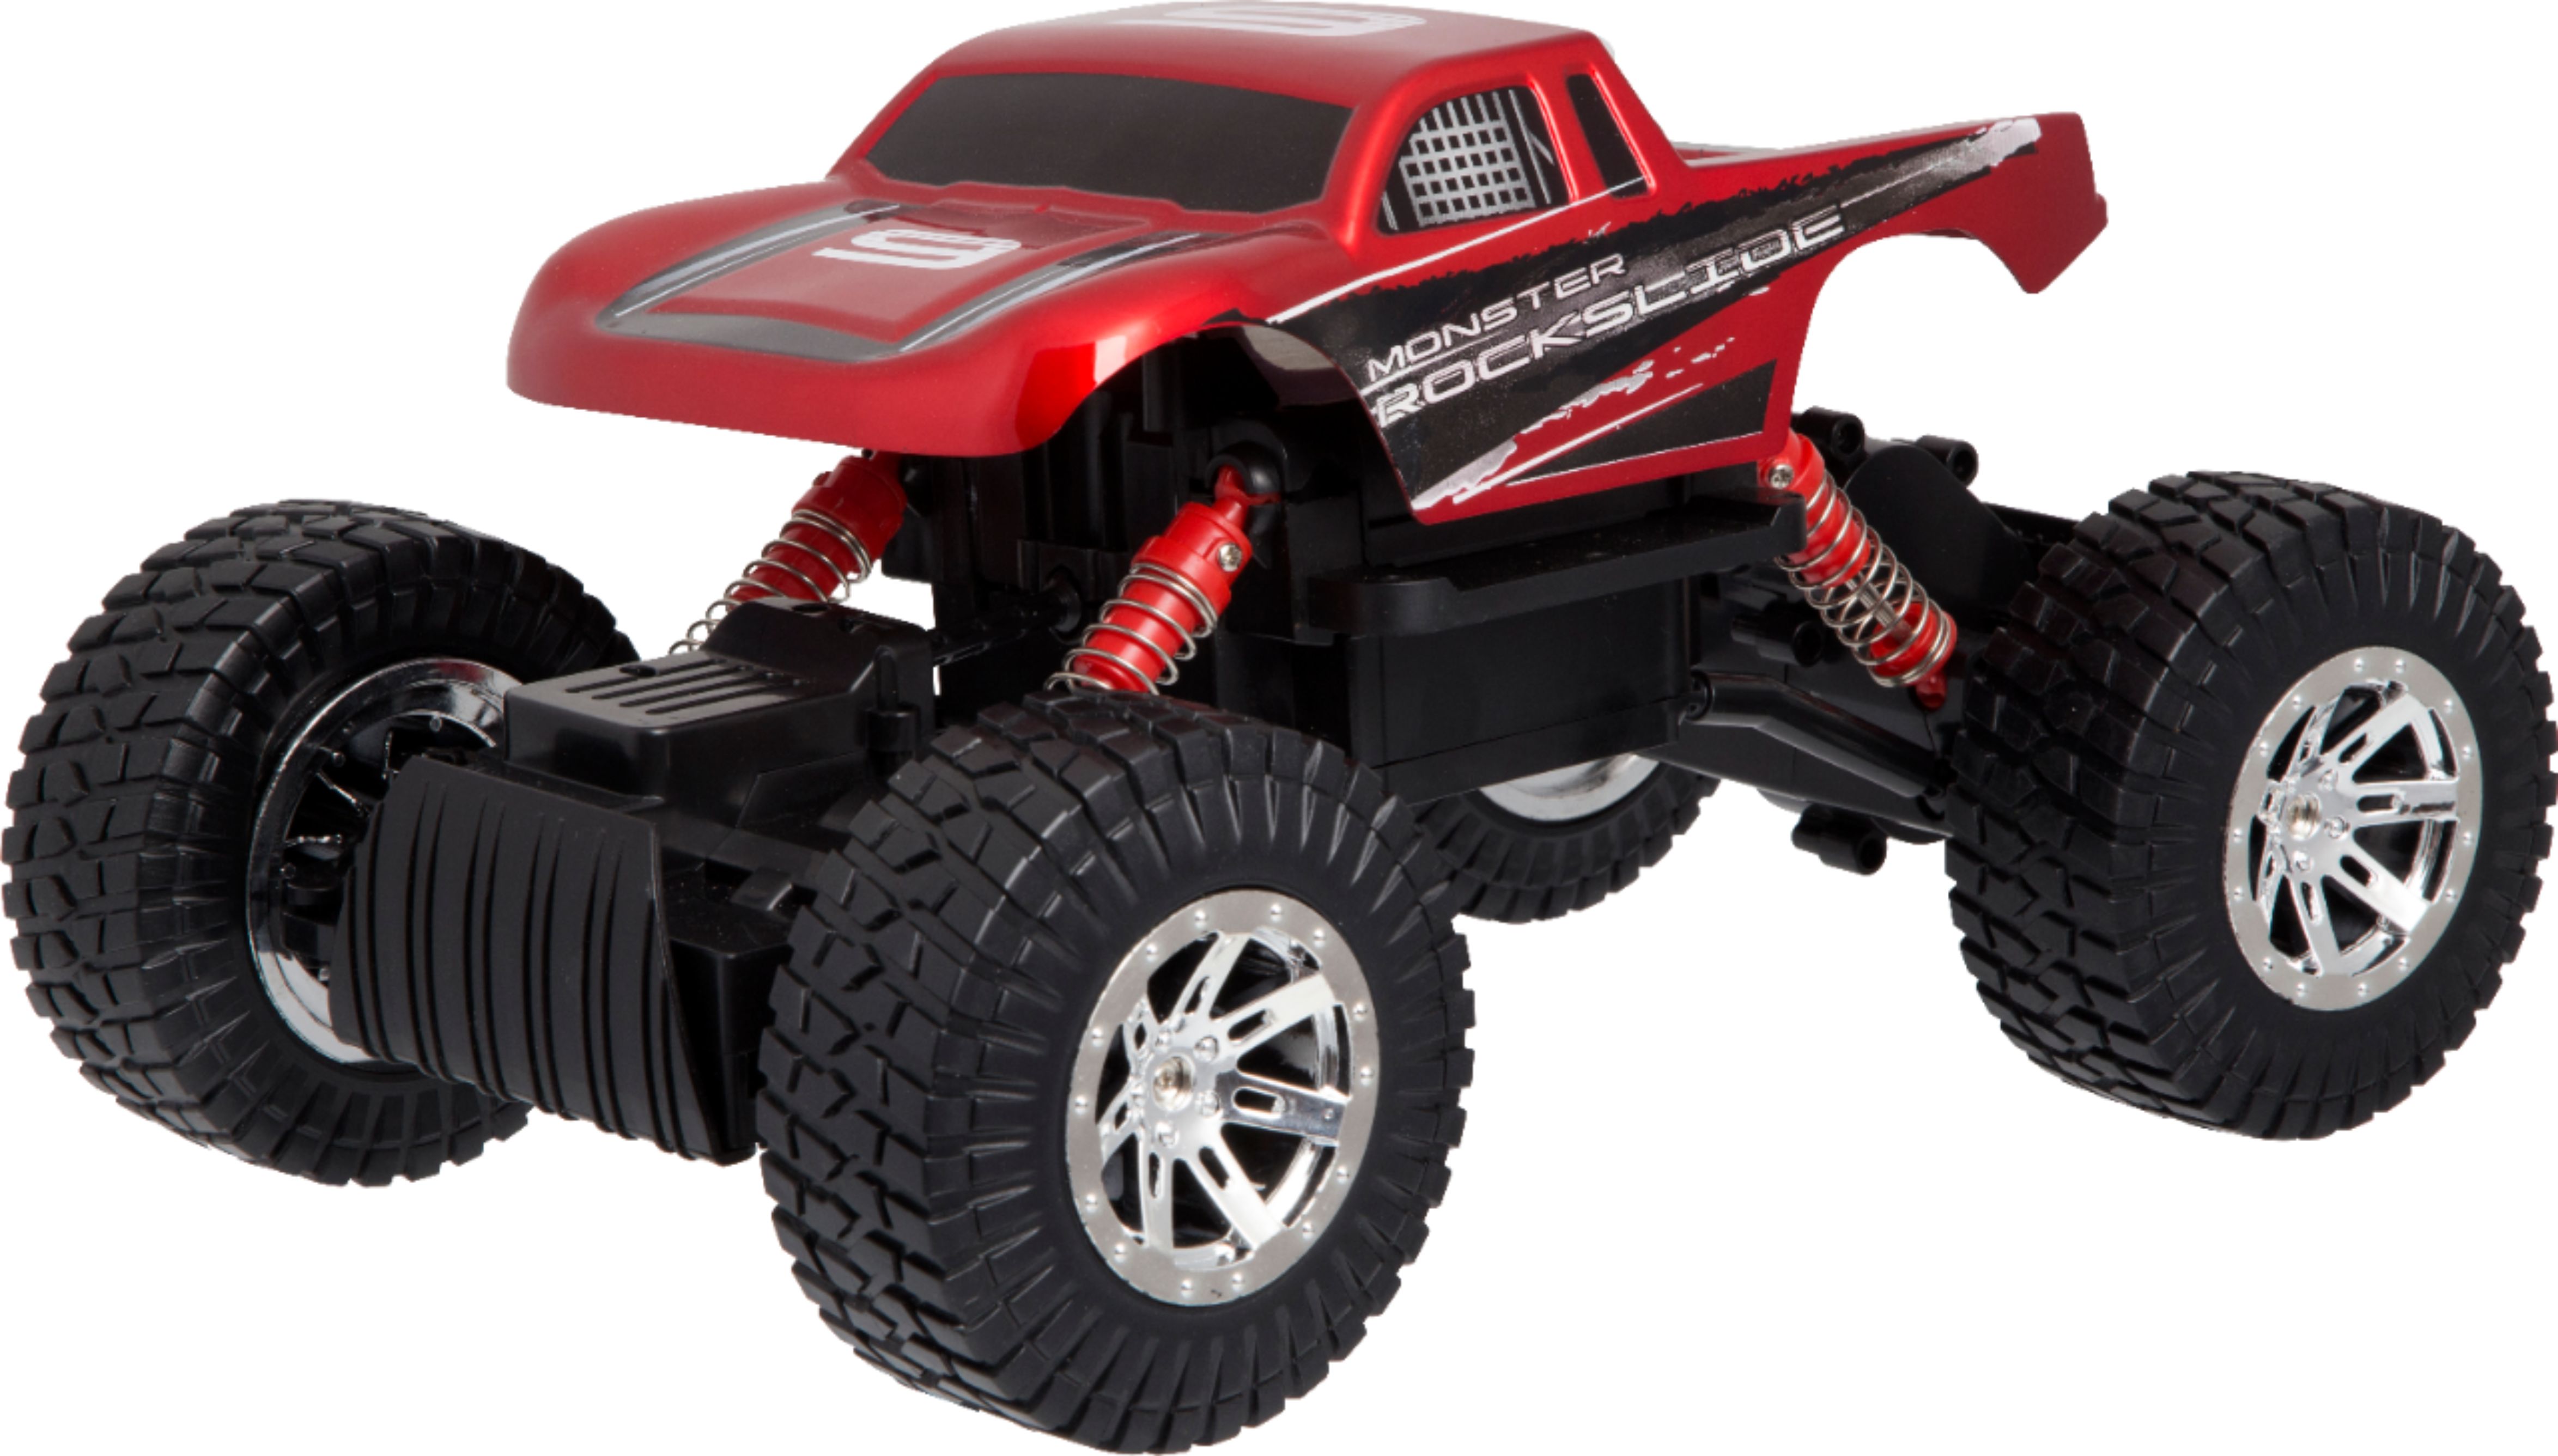 Angle View: Hot Wheels - Monster Trucks Demolition Doubles (2-Pack) - Styles May Vary